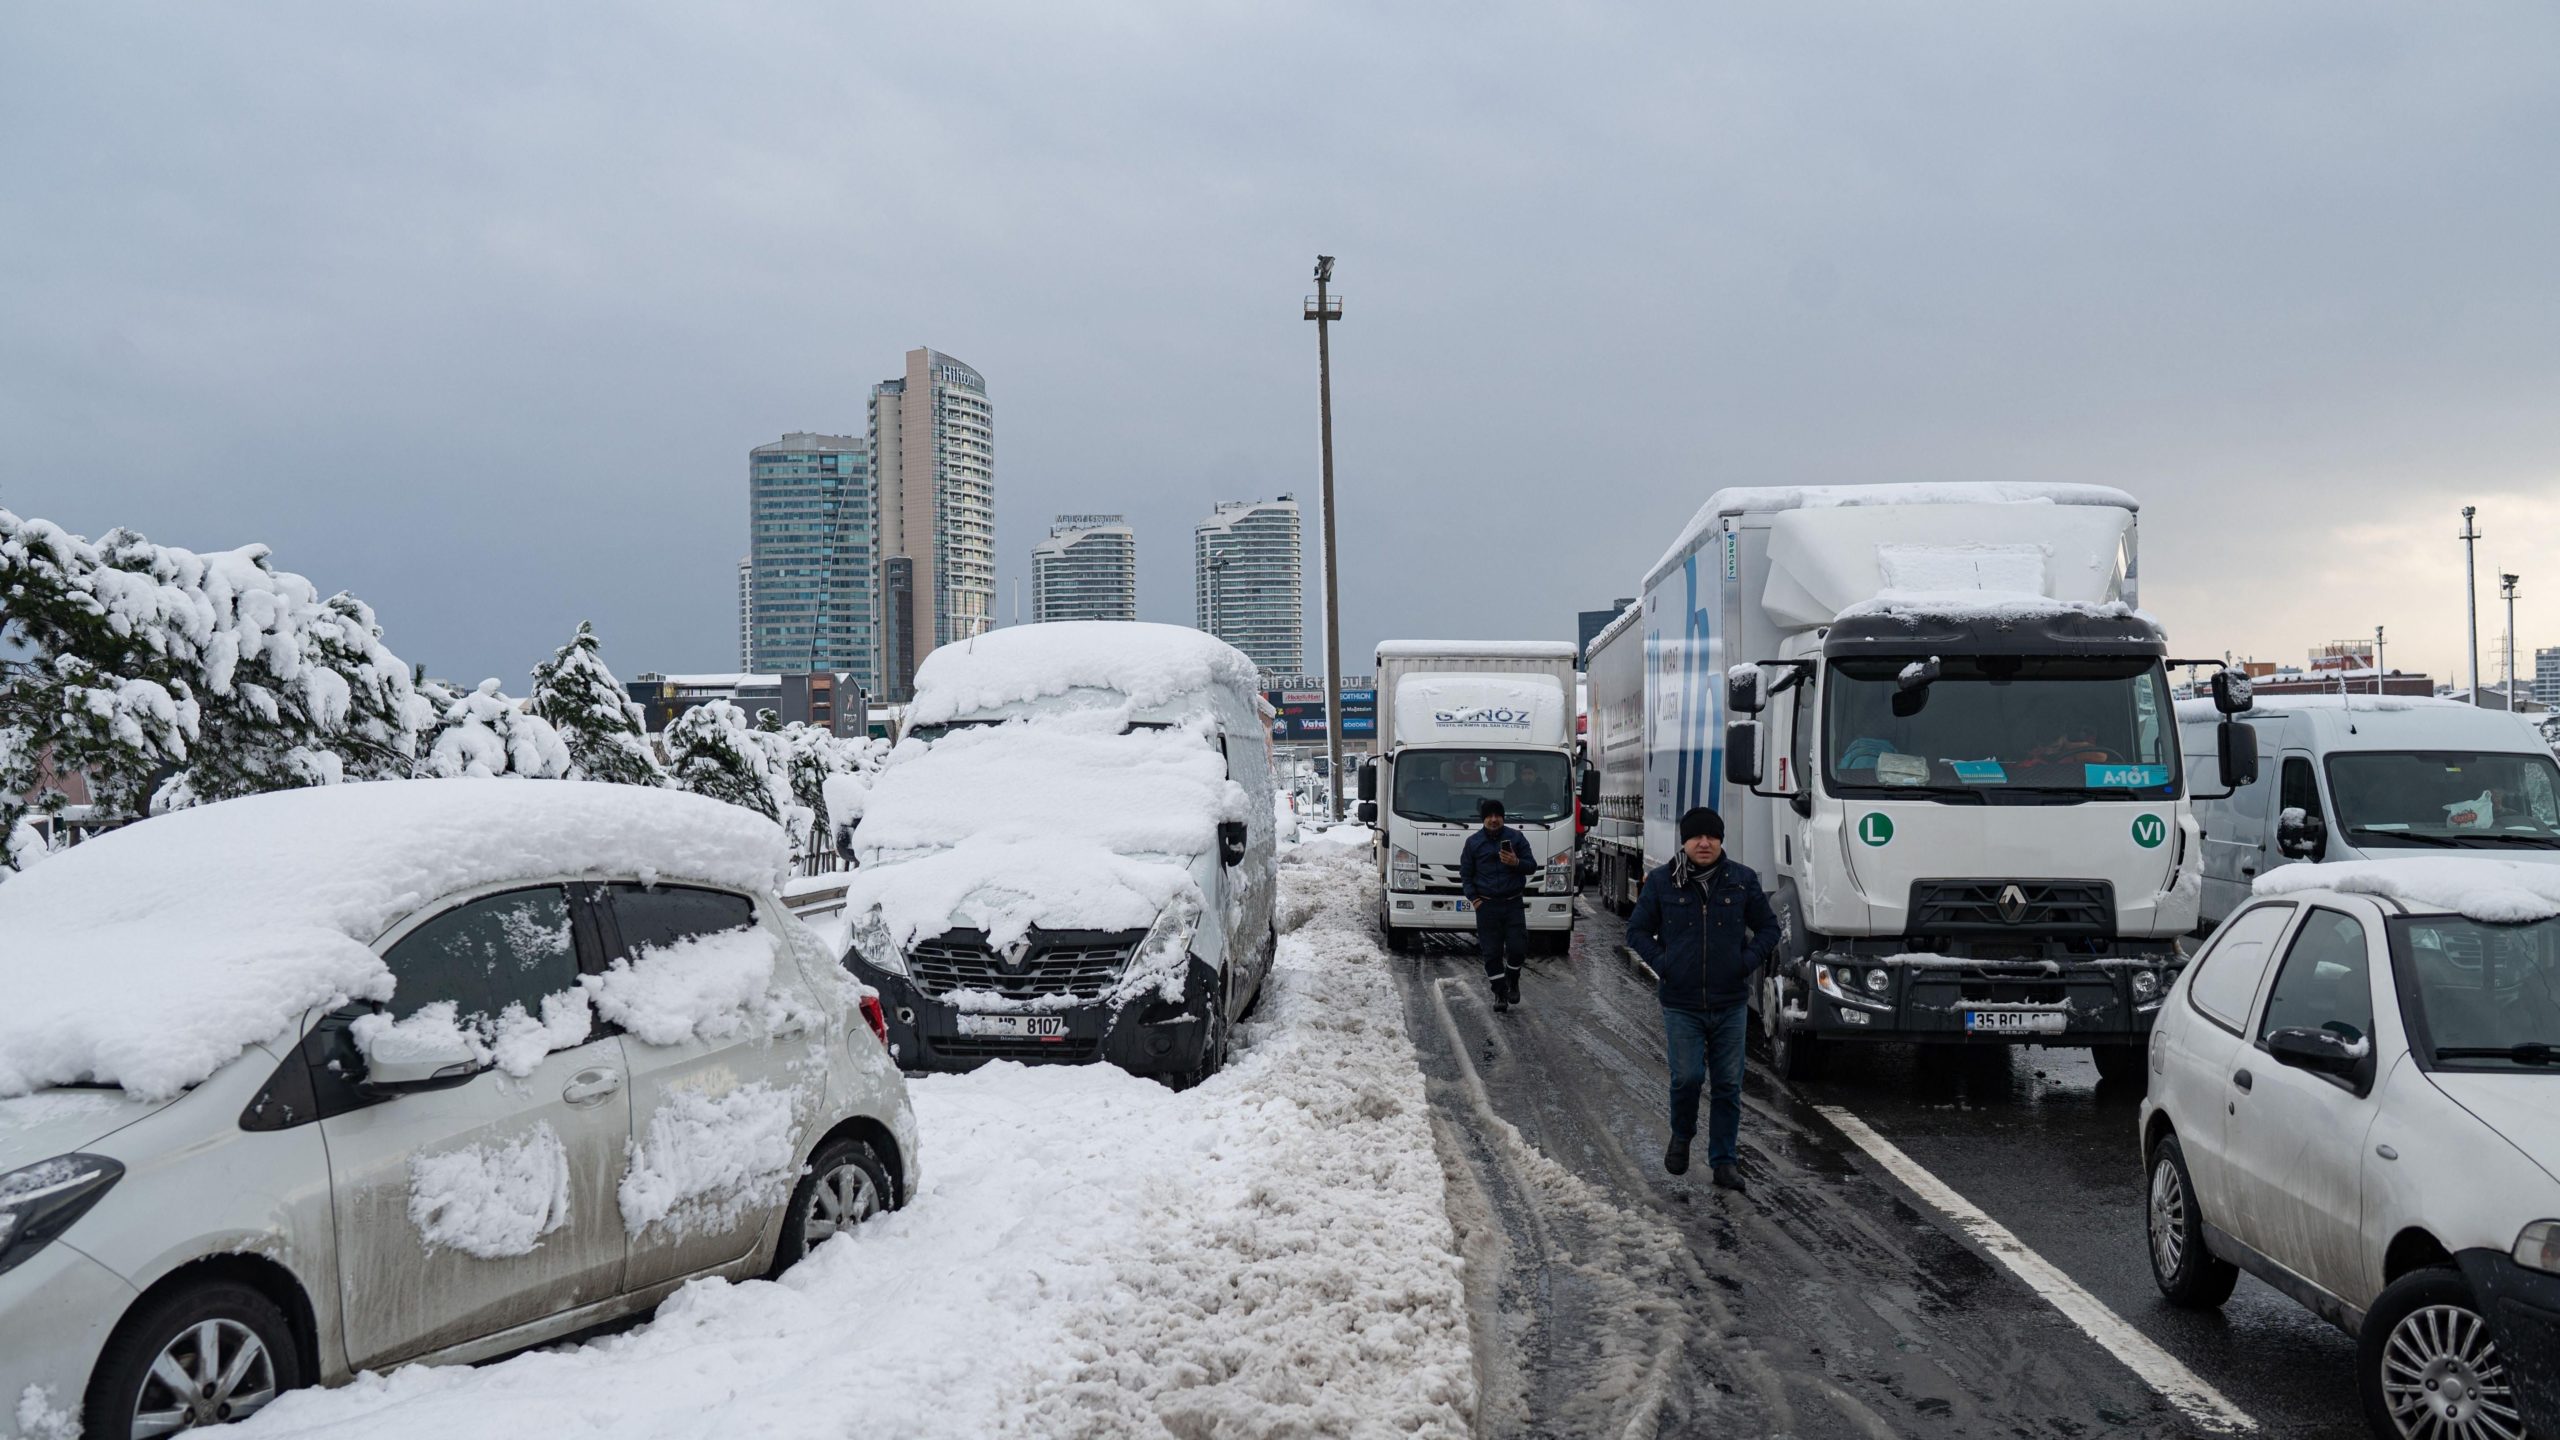 Men walk past vehicles stranded on the highway after heavy snowfall at the Basaksehir district in Istanbul. (Photo: Yasin Akgul/AFP, Getty Images)